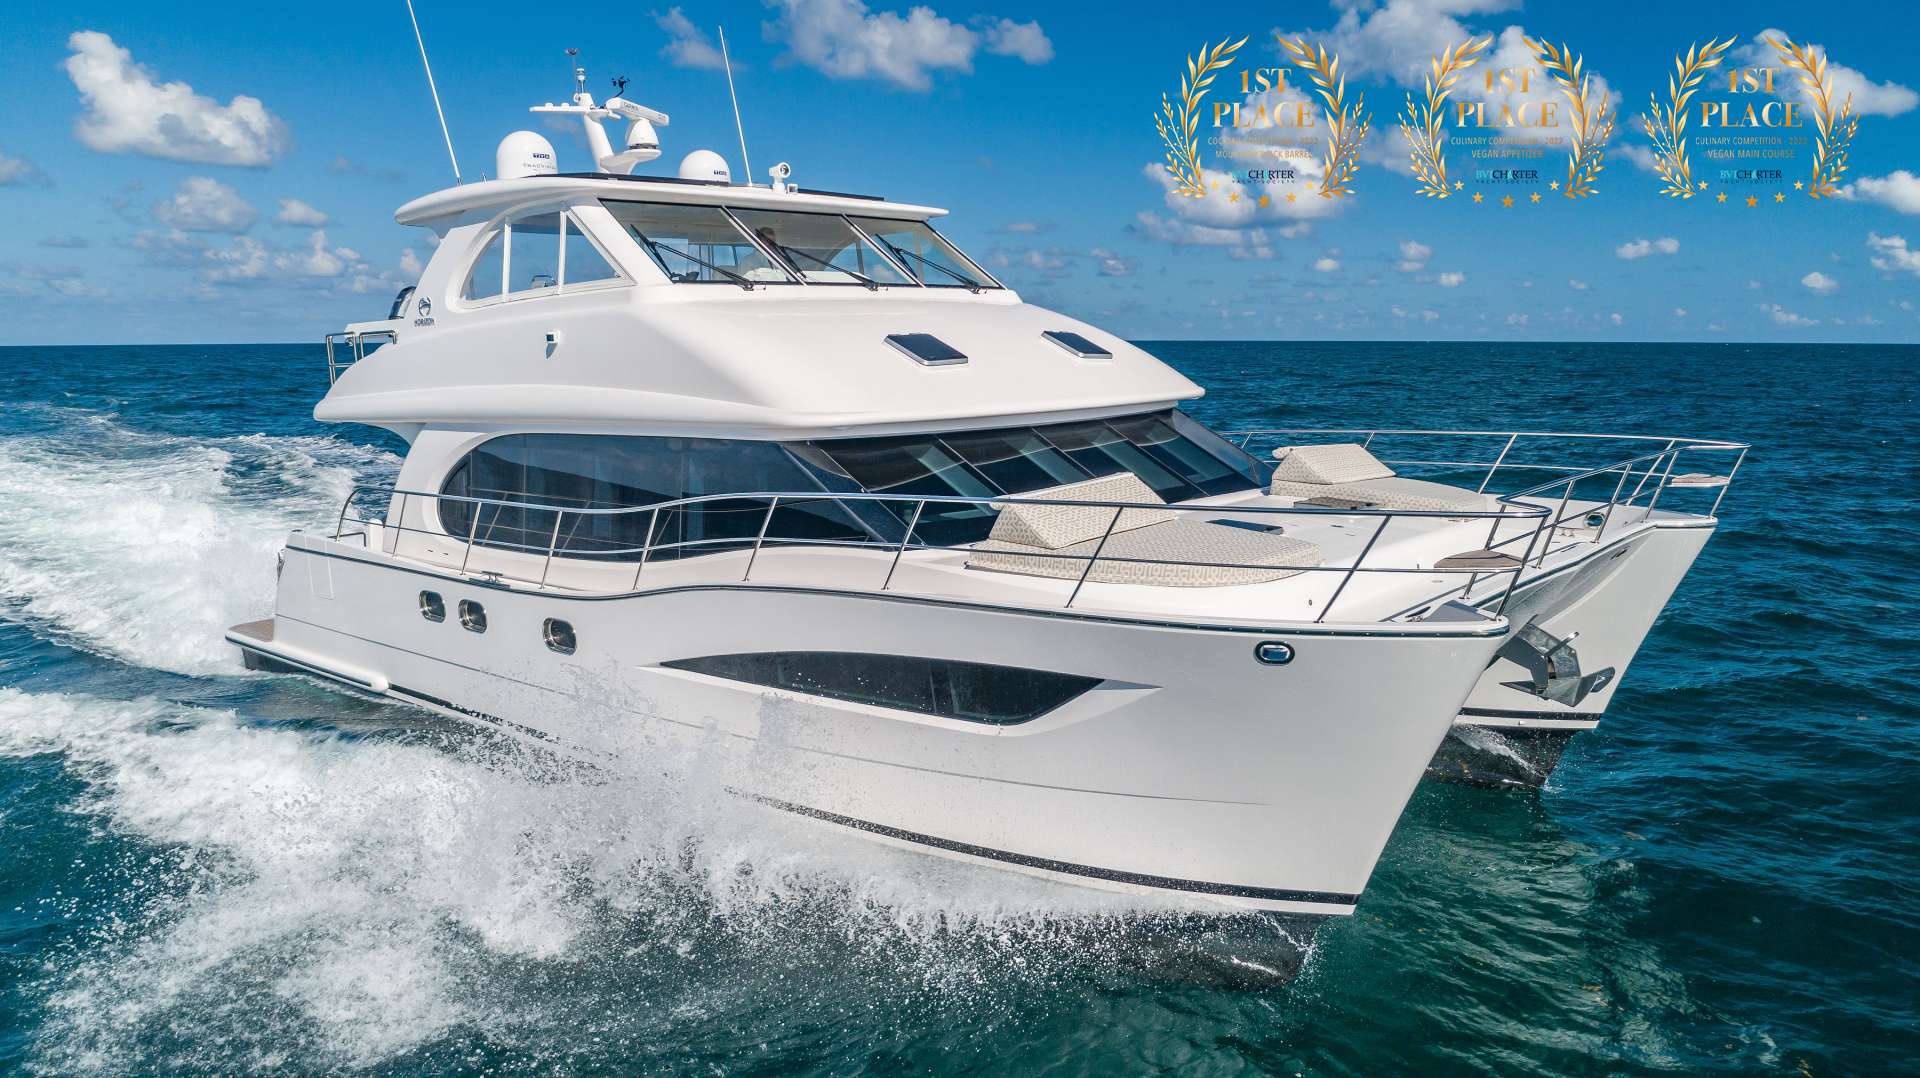 Look to Horizon to produce such a spacious and commodious 52 powercat.  MYSTIC SOUL's design is nothing less than stellar! She is nothing less than a blue water cruiser, but beneath the proven hull design are two bespoke guest queen suites and a spacious saloon and galley.  Couple that with a large flybridge and helm station and ample aft cockpit deck, and you have the recipe for a fine charter yacht.
The perfect choice for a BVI charter for 4 discerning guests: MYSTIC SOUL!
Mystic Soul features an award-winning crew: Captain Phil Ashford and Chef Audrey Bouillane.  Chef Audrey won 1st place in the BVI Charter Yacht show for both her appetizer and entry and Captain Phil won 1st place for his rum cocktail.  Foodies will love spending a week aboard Mystic Soul with Phil and Audrey! 
